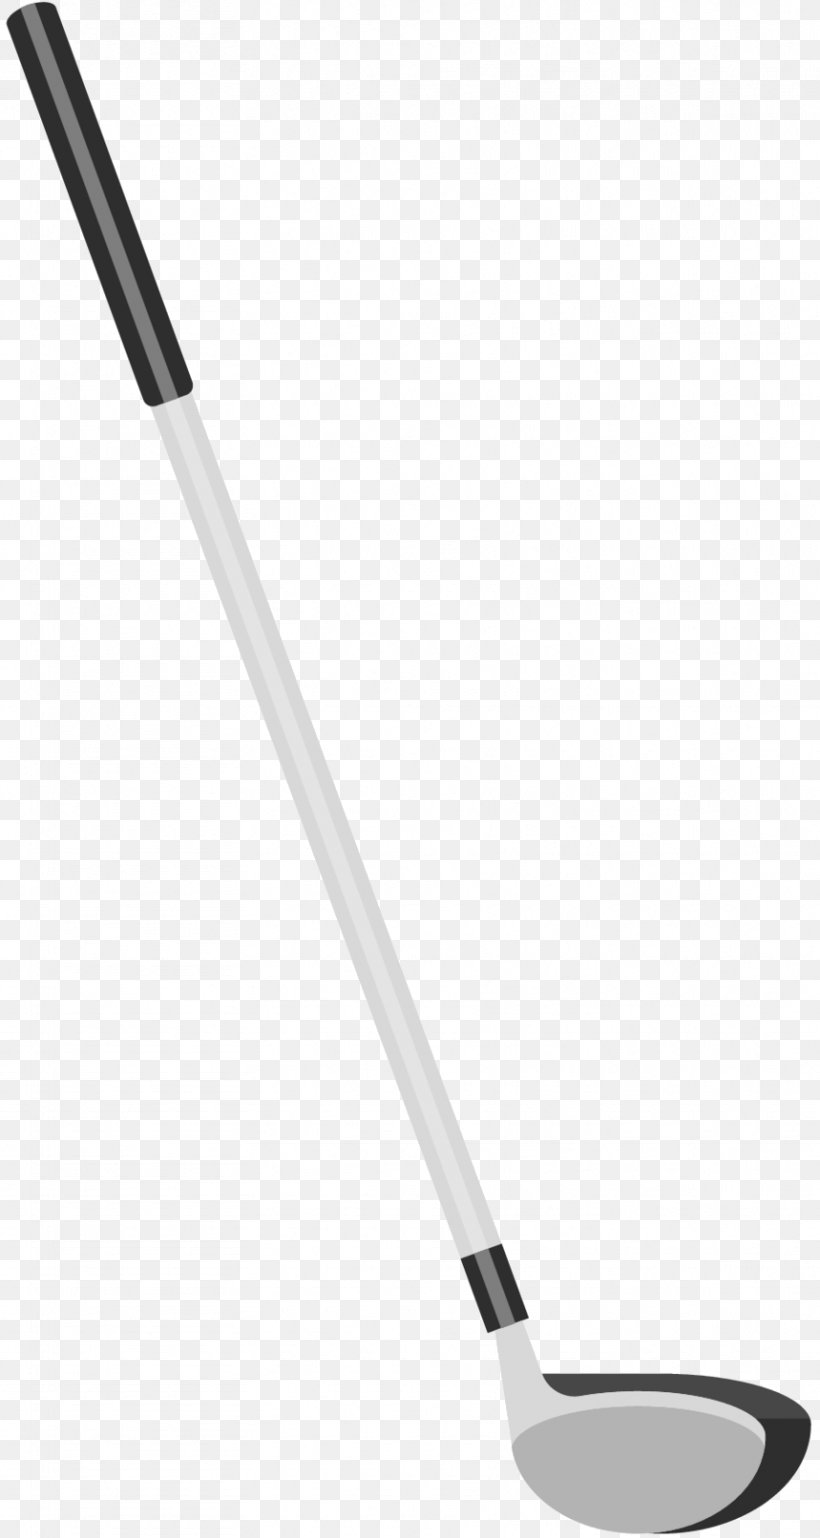 Cutlery Product Design Line Sports, PNG, 859x1612px, Cutlery, Garden Tool, Golf Club, Golf Equipment, Household Cleaning Supply Download Free